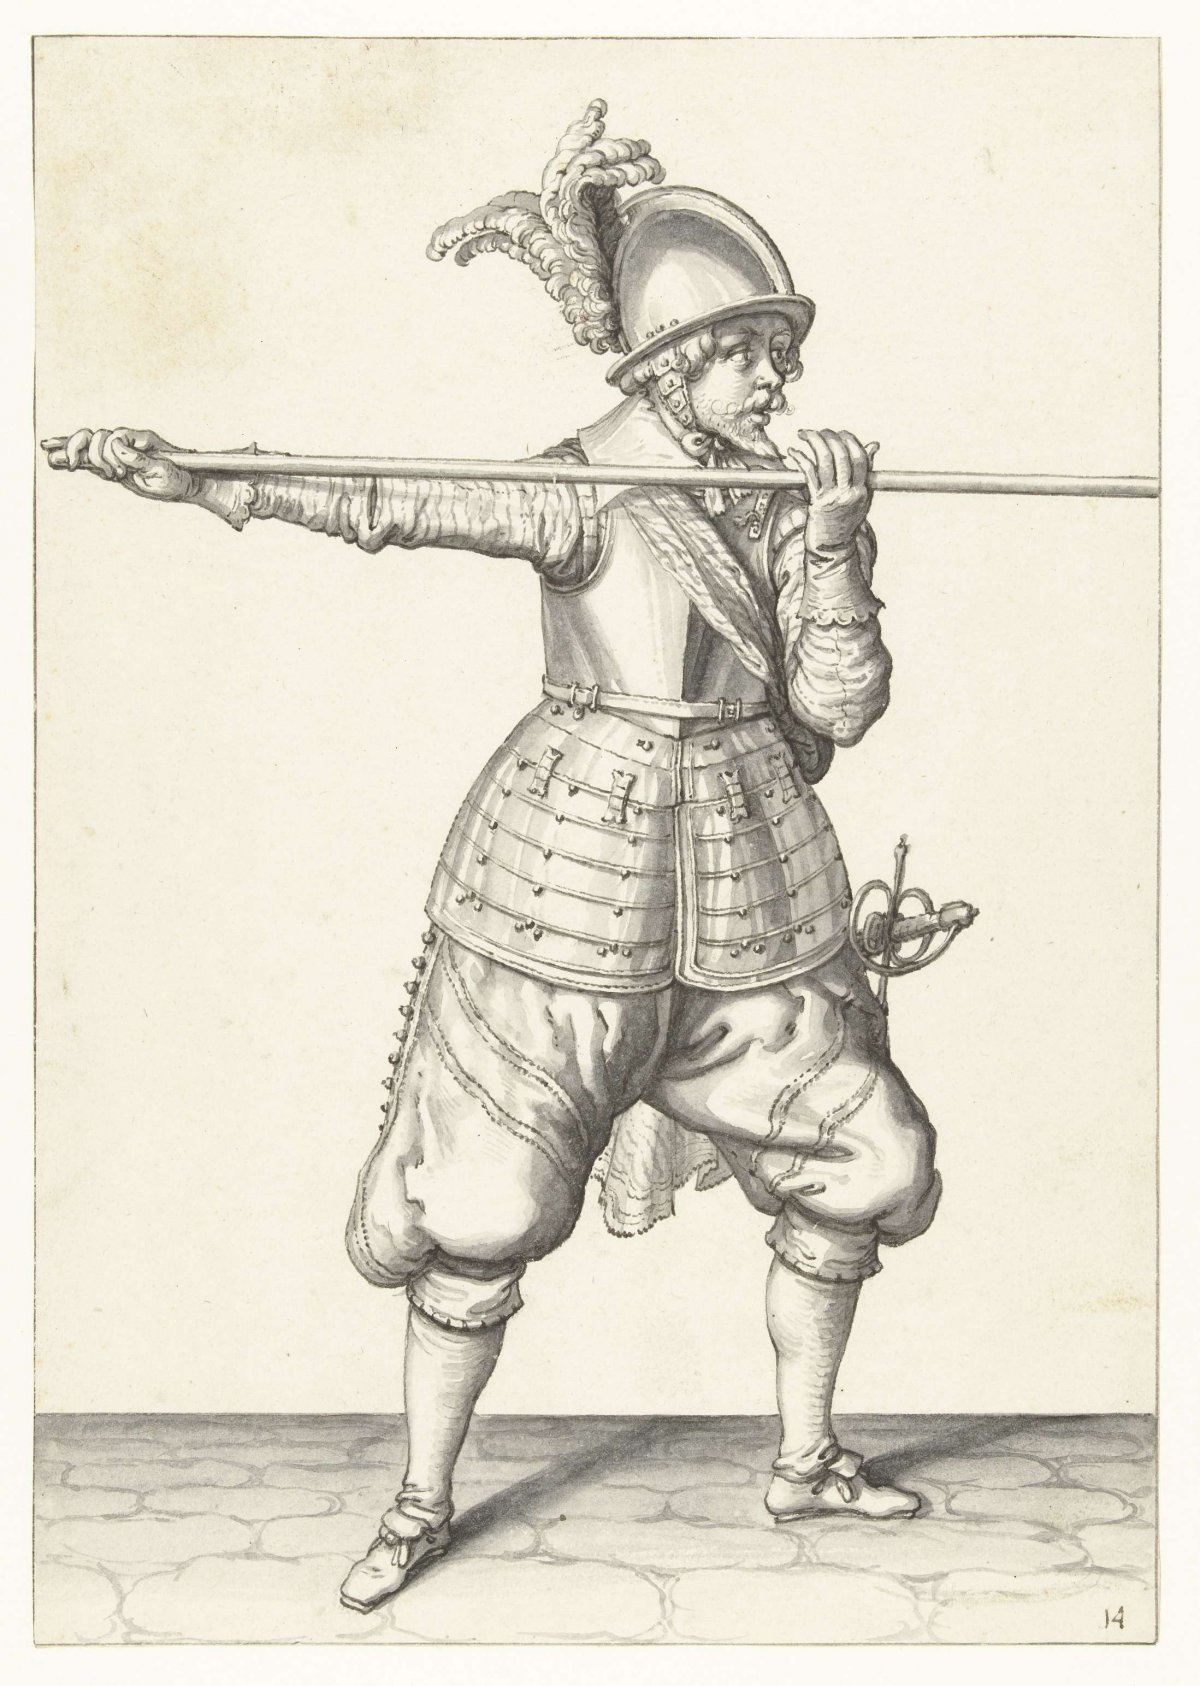 Soldier carrying his spear with both hands horizontal at shoulder height, his right hand at the base of the weapon, Jacques de Gheyn (II), 1596 - 1606